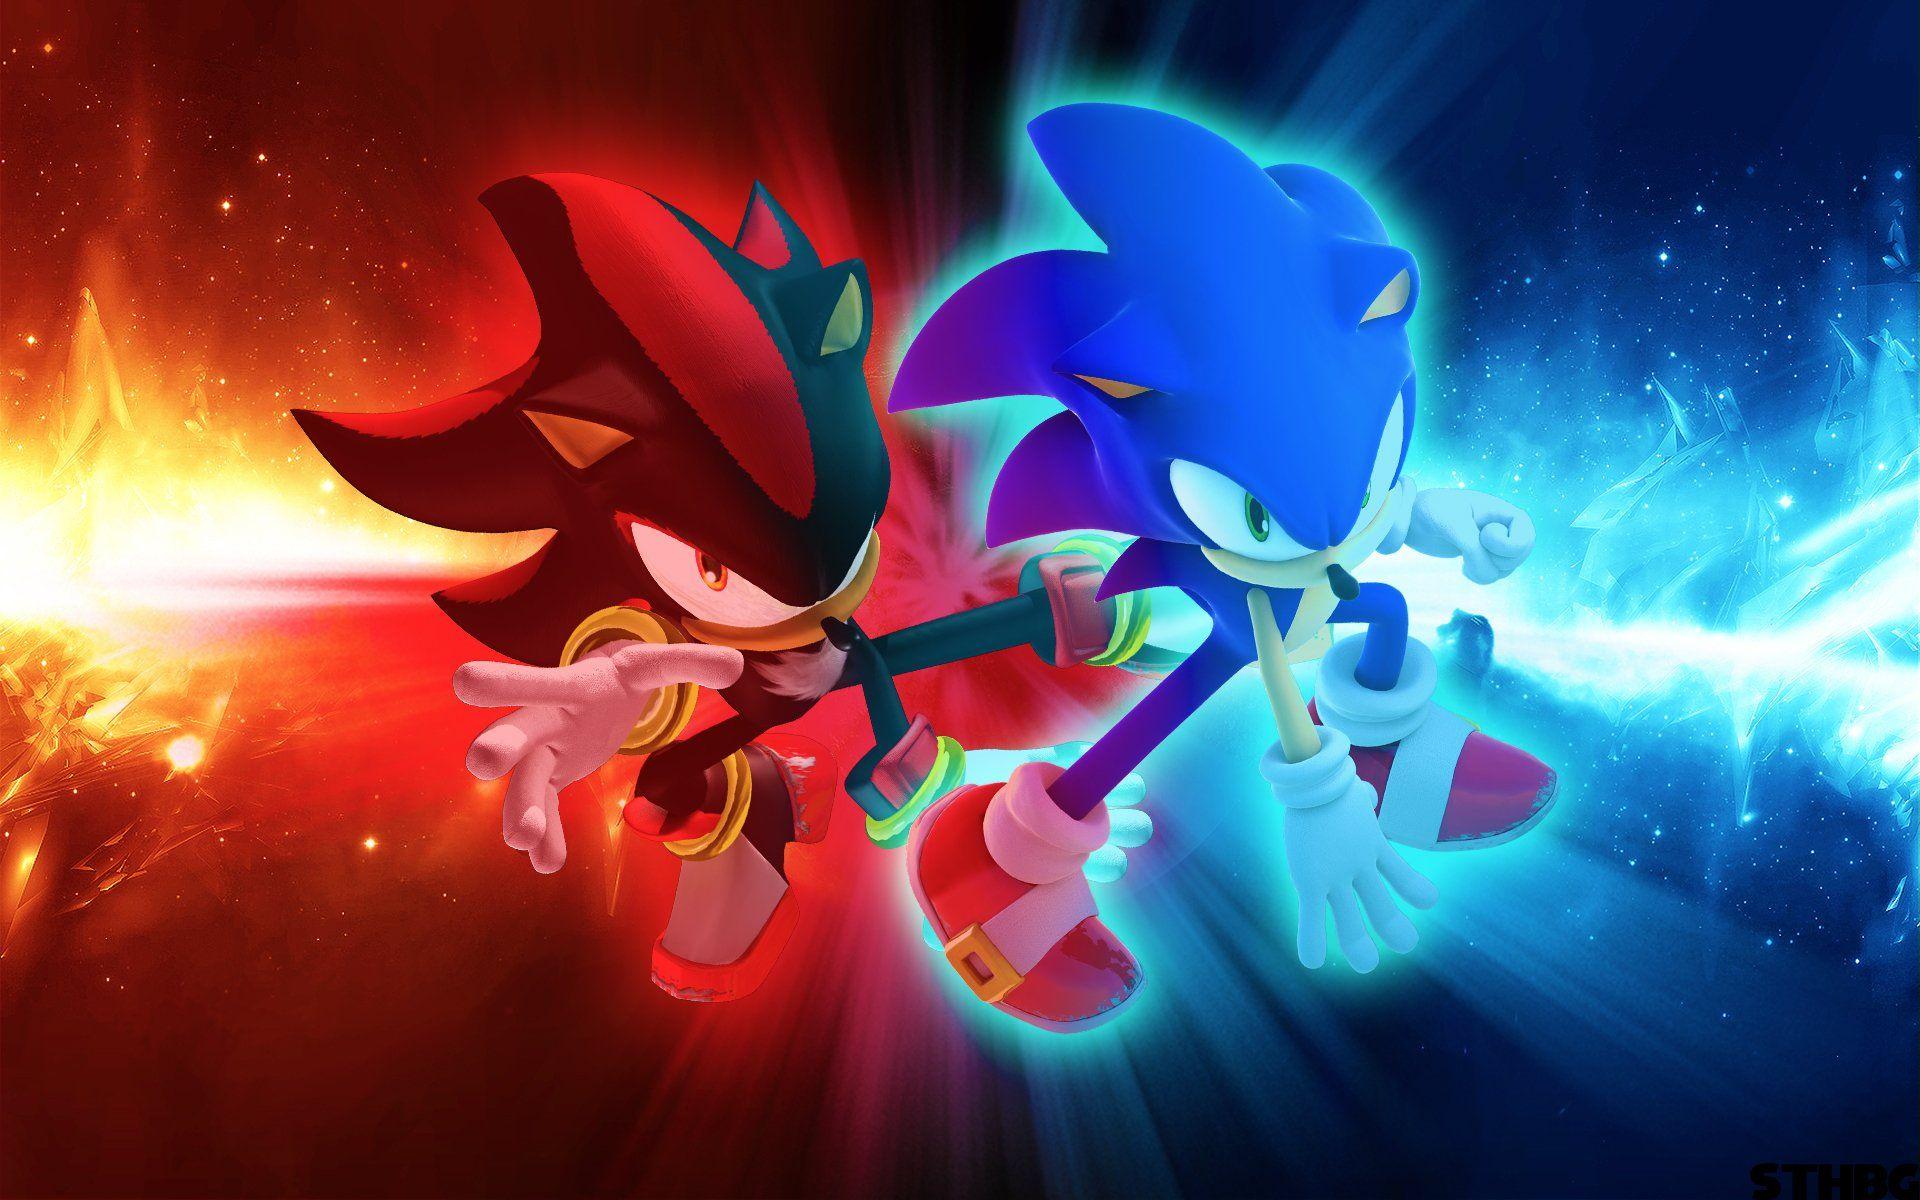 Sonic The Hedgehog - Desktop Wallpapers, Phone Wallpaper, PFP, Gifs, and  More!